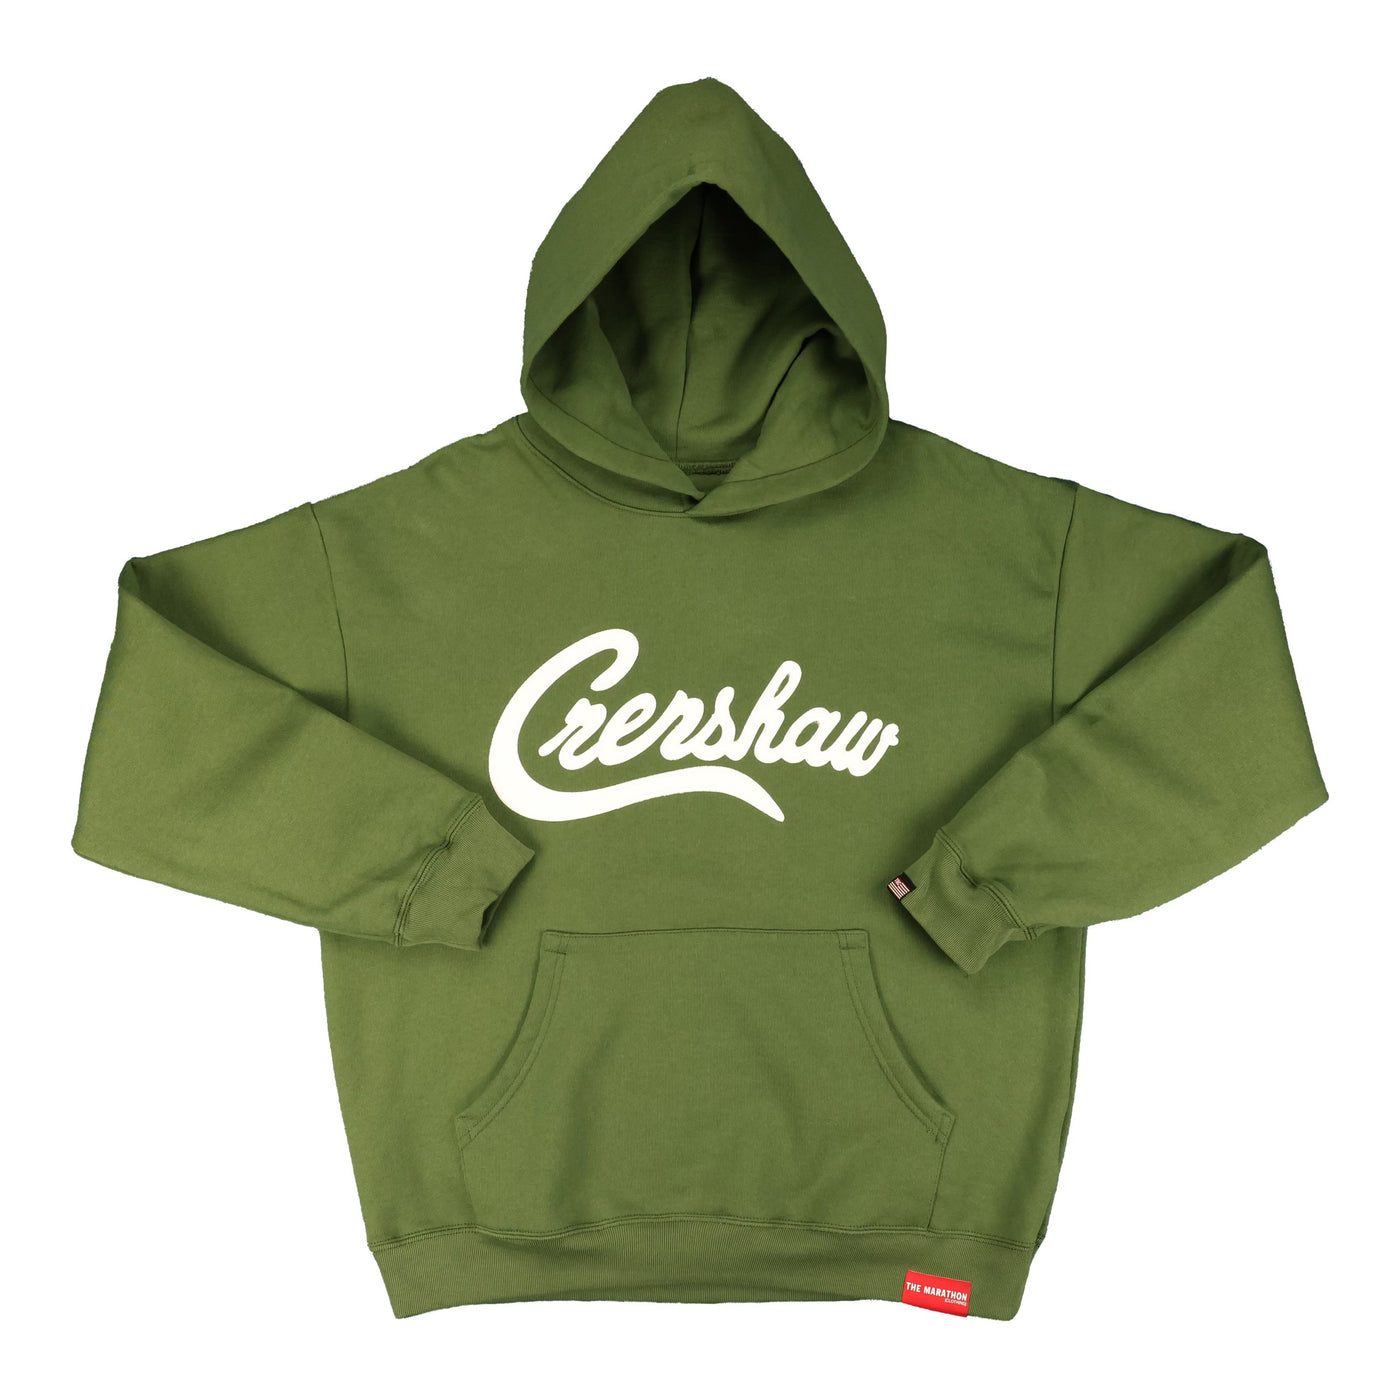 Crenshaw Hoodie - Olive/White - Front